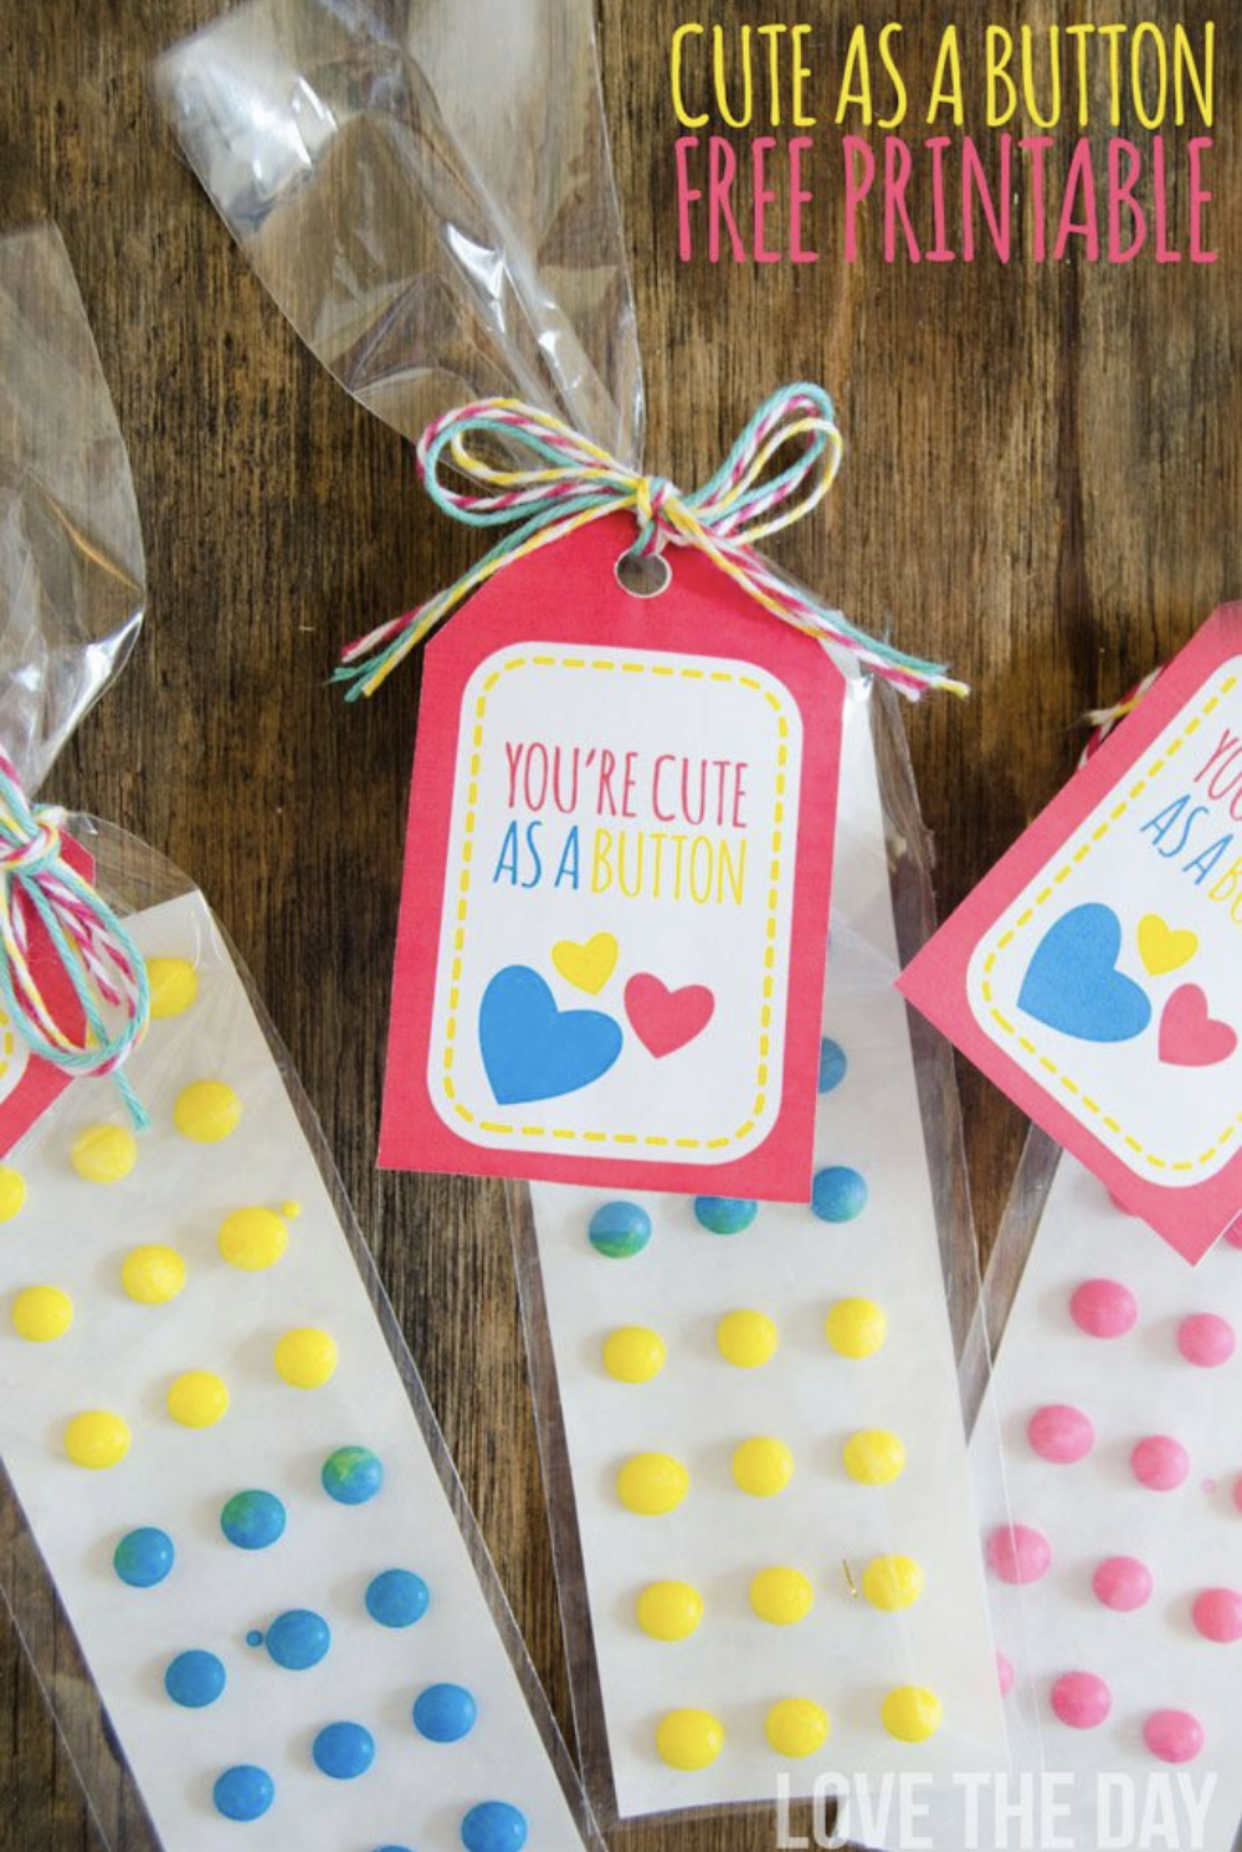 20 Creative Button Crafts on Love The Day by Lindi Haws